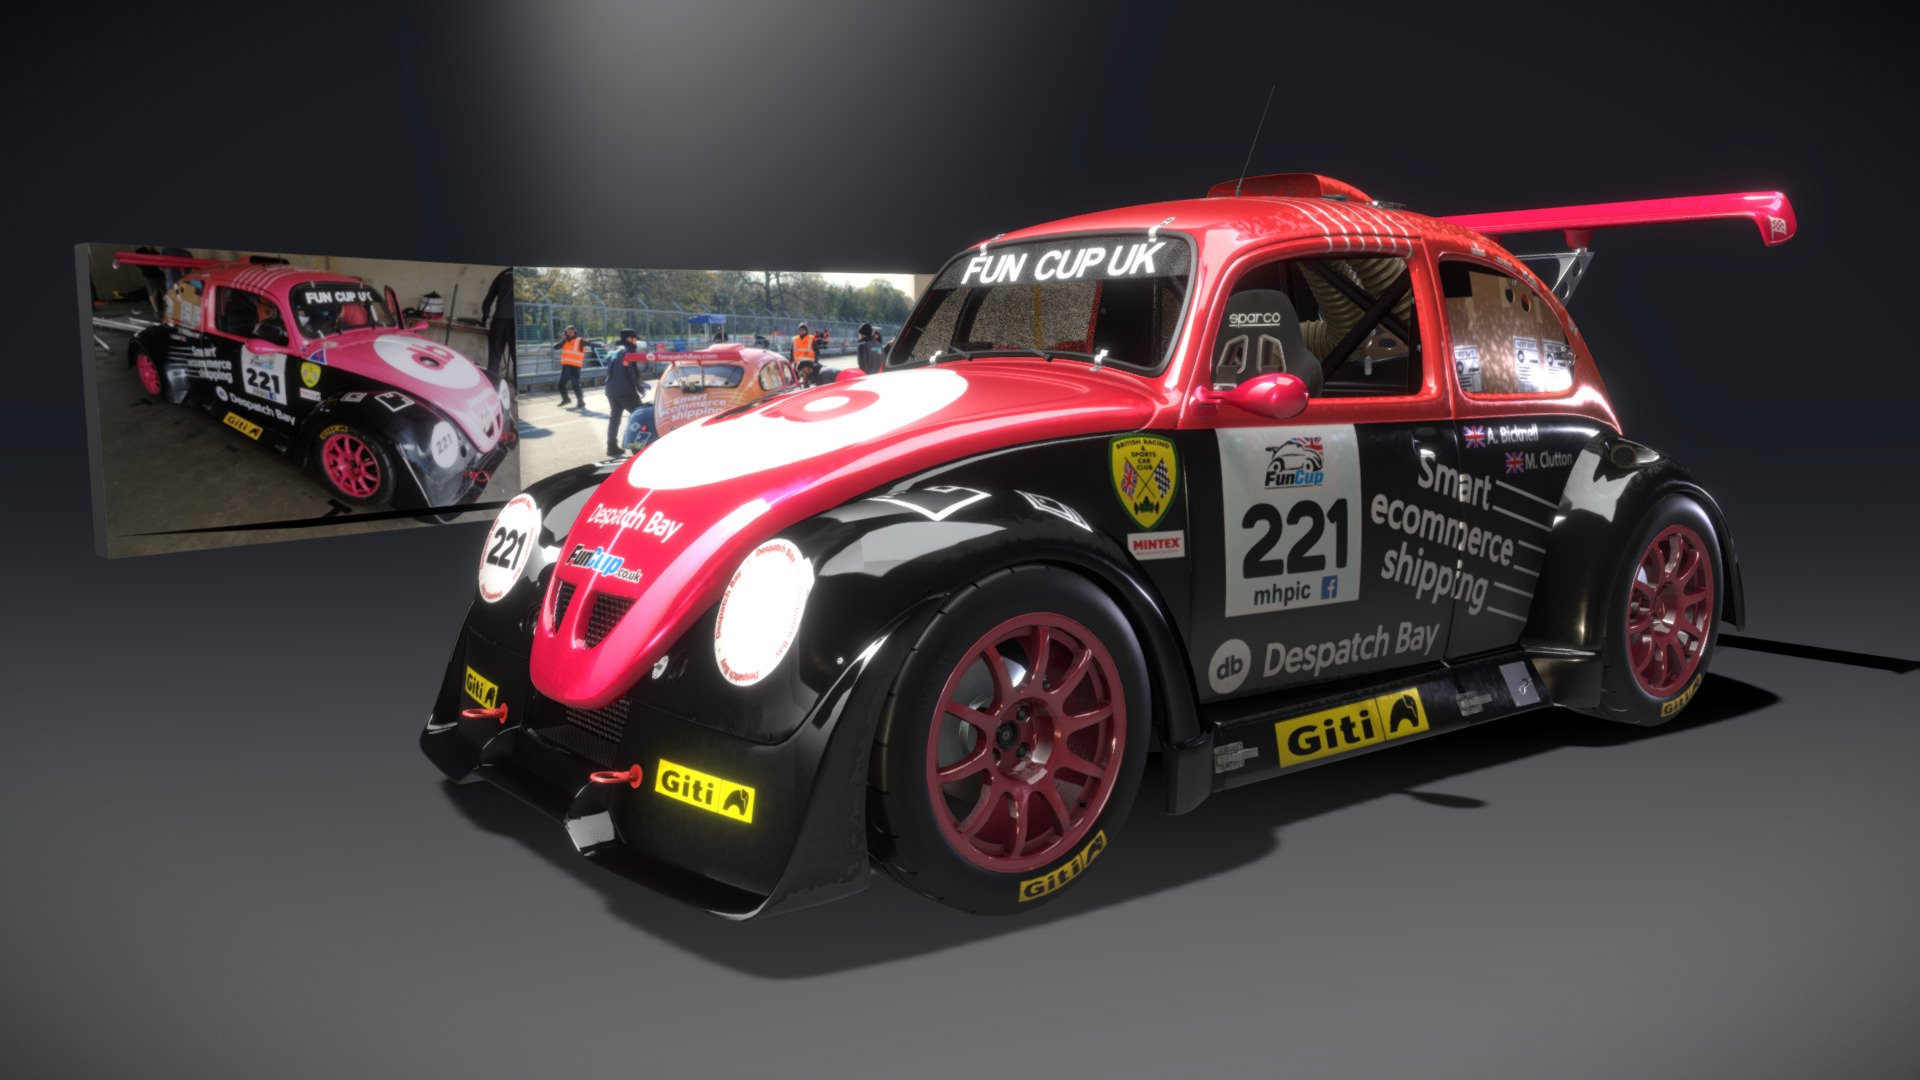 A model I've been working on for months, the main model was done around December, but some fixes were done in January. Now the model is finally in Assetto Corsa, because this was commisioned by a guy who wanted his IRL race car in AC in the off season. Now it finally seems ready to share :)

A FunCup Beetle is a kitcar, a tube-frame chassis with a fibreglass ( I presume ) body on top, only really shares the windscreen with a real Super Beetle.

This being my most detailed model to date, I'm very proud to show my work here after months of inactivity :D

Now this isn't the only part of the whole package, there are some LODs also, but they aren't as exciting as the main car.

This is obviously not for sale 3d model